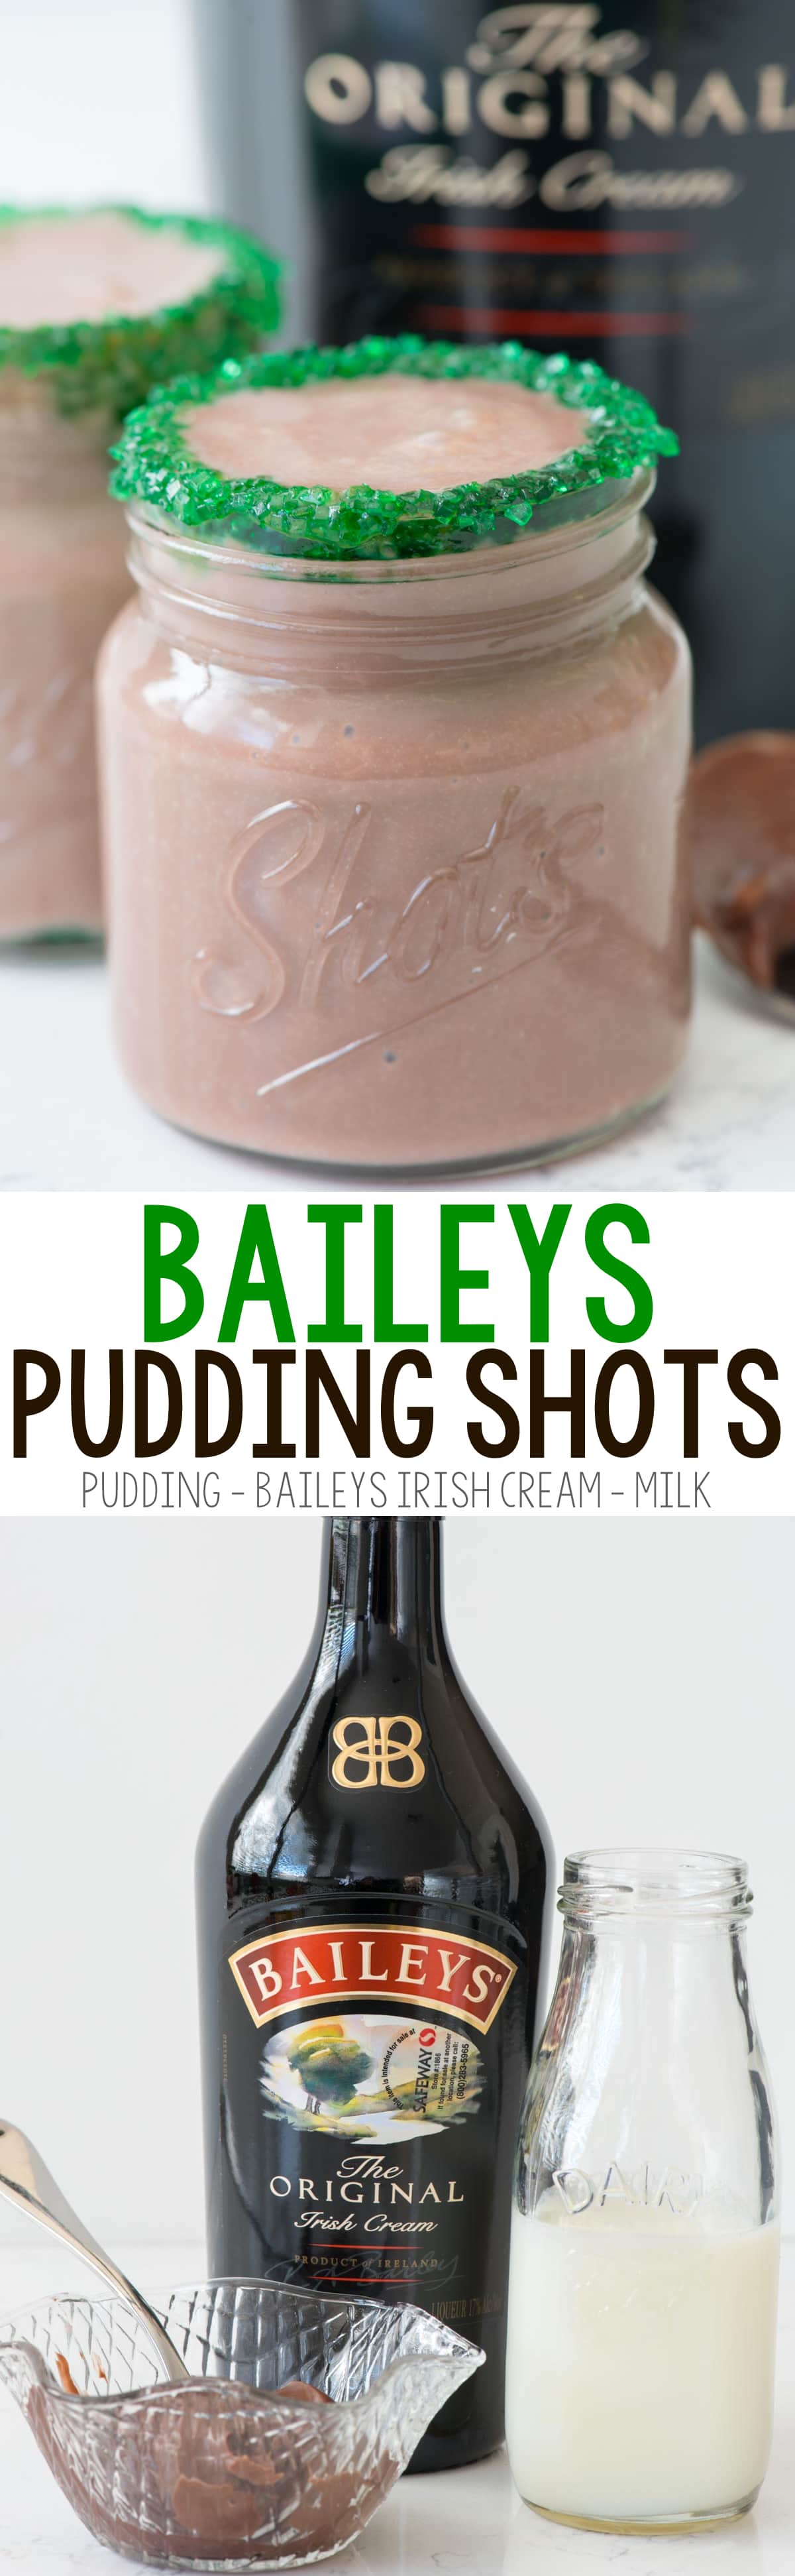 Baileys Pudding Shots - these easy three ingredient cocktails are perfect for St. Patricks Day...or any day you want Irish Cream! They can be made for kids too!